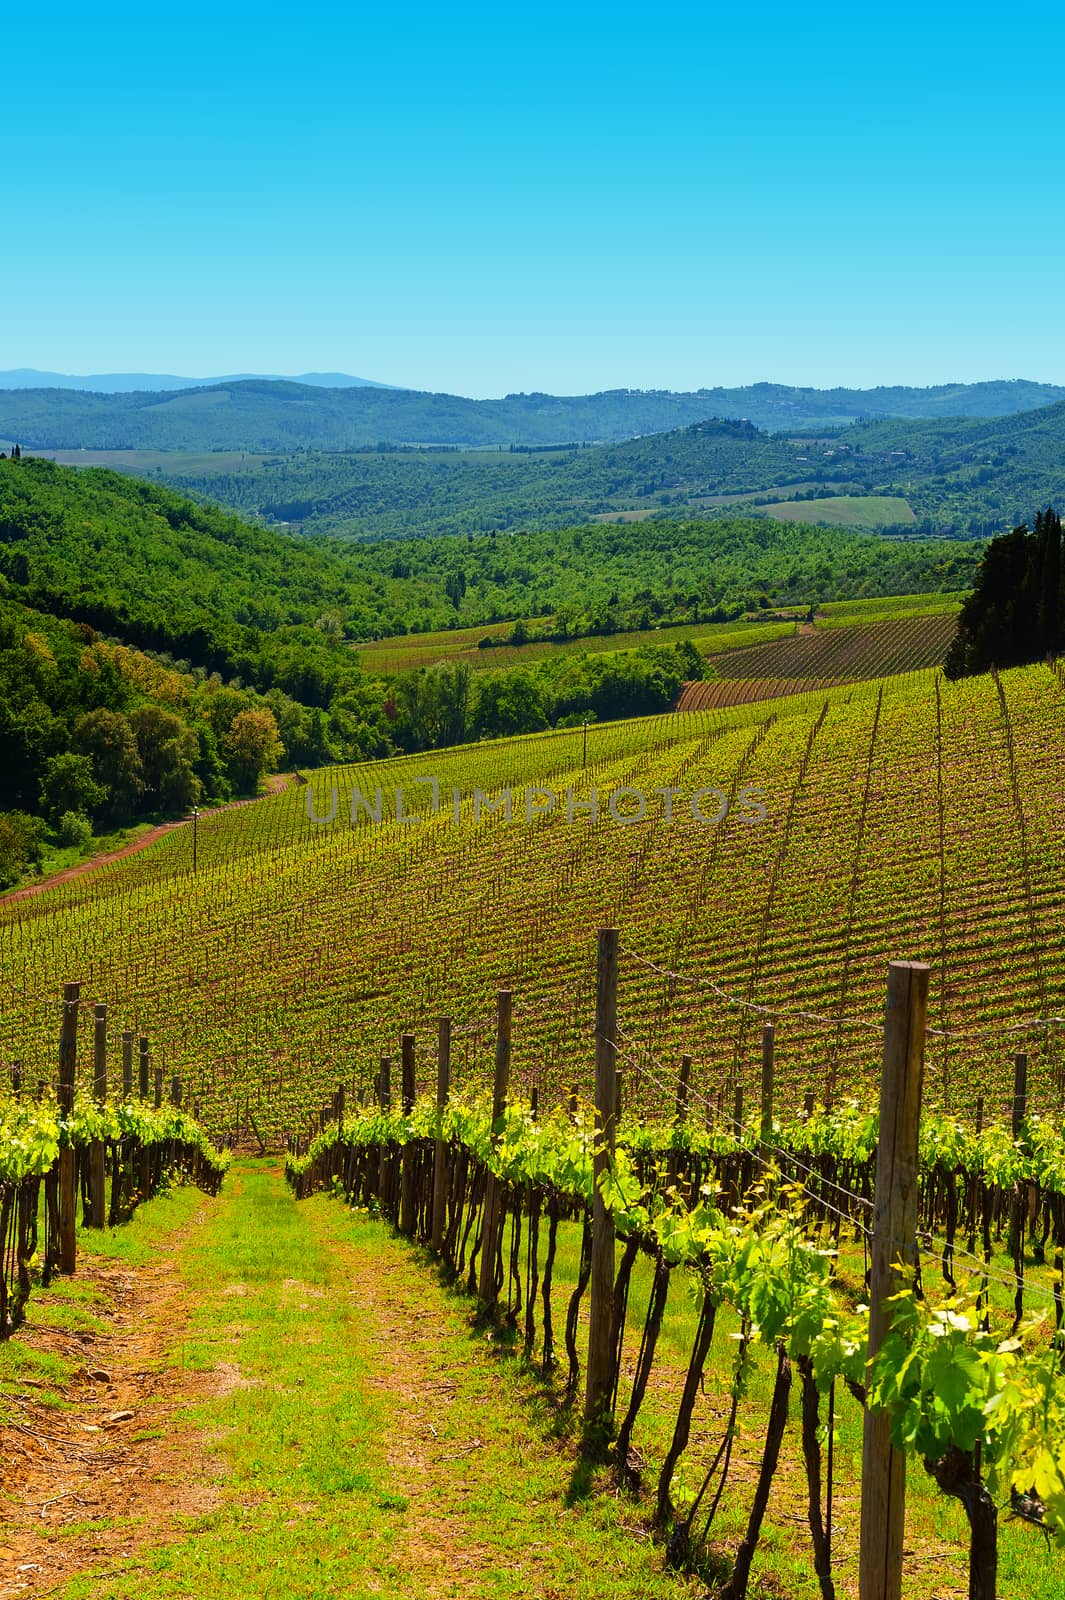 Hill of Tuscany with Young Vineyard in the Chianti Region